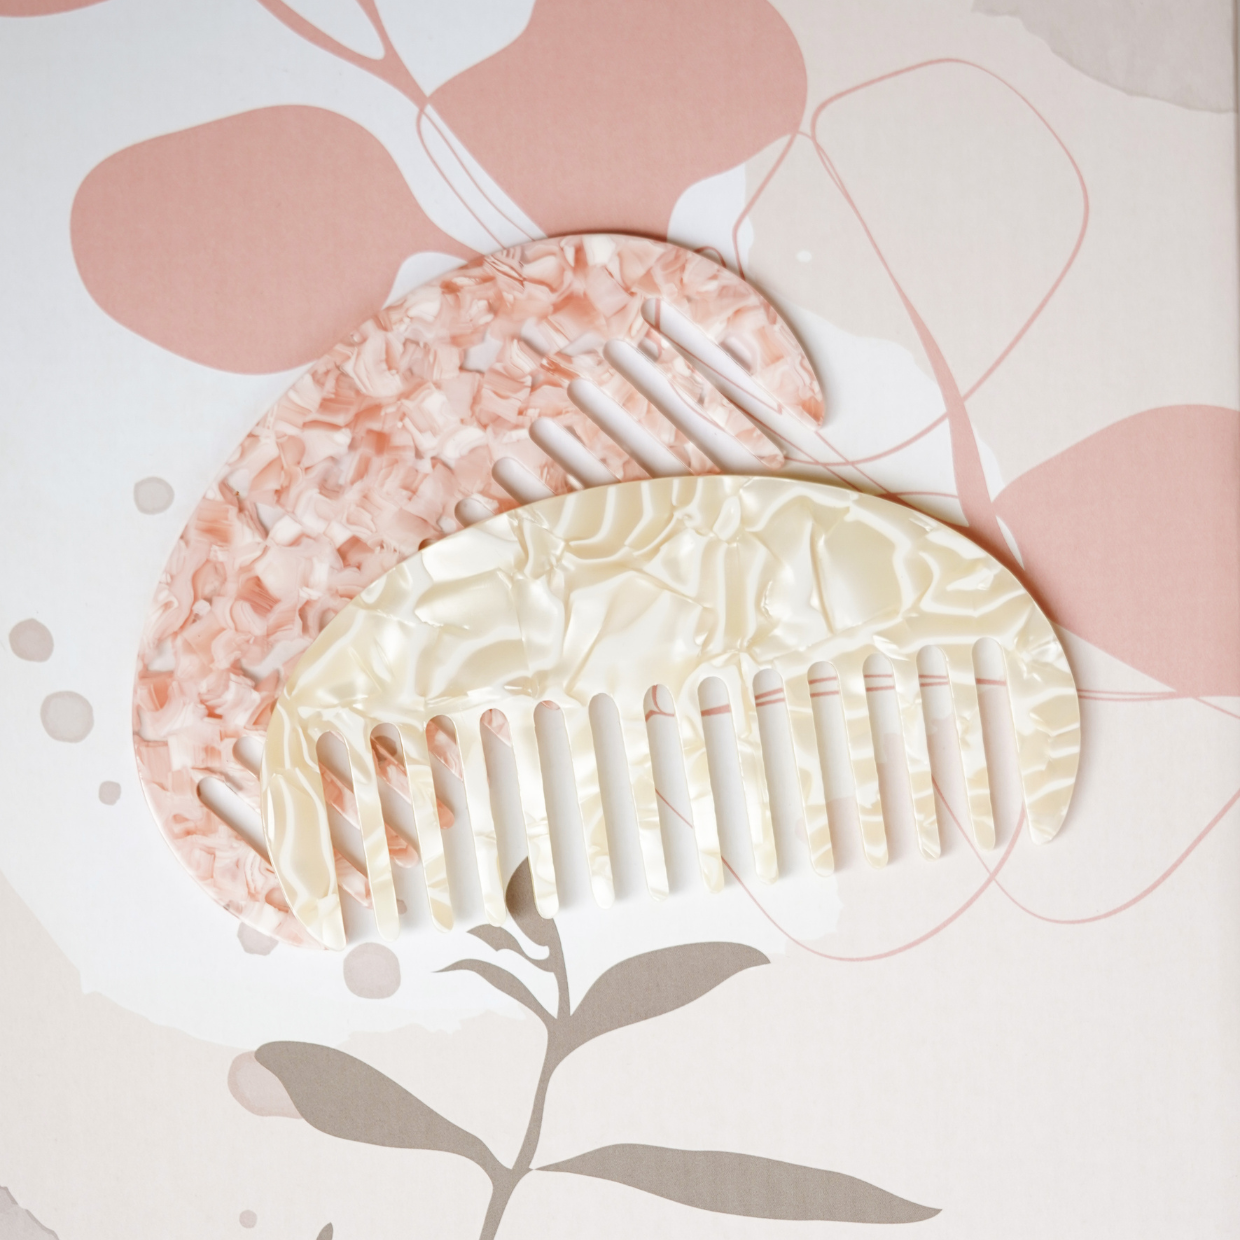 Hair Comb in White Shell